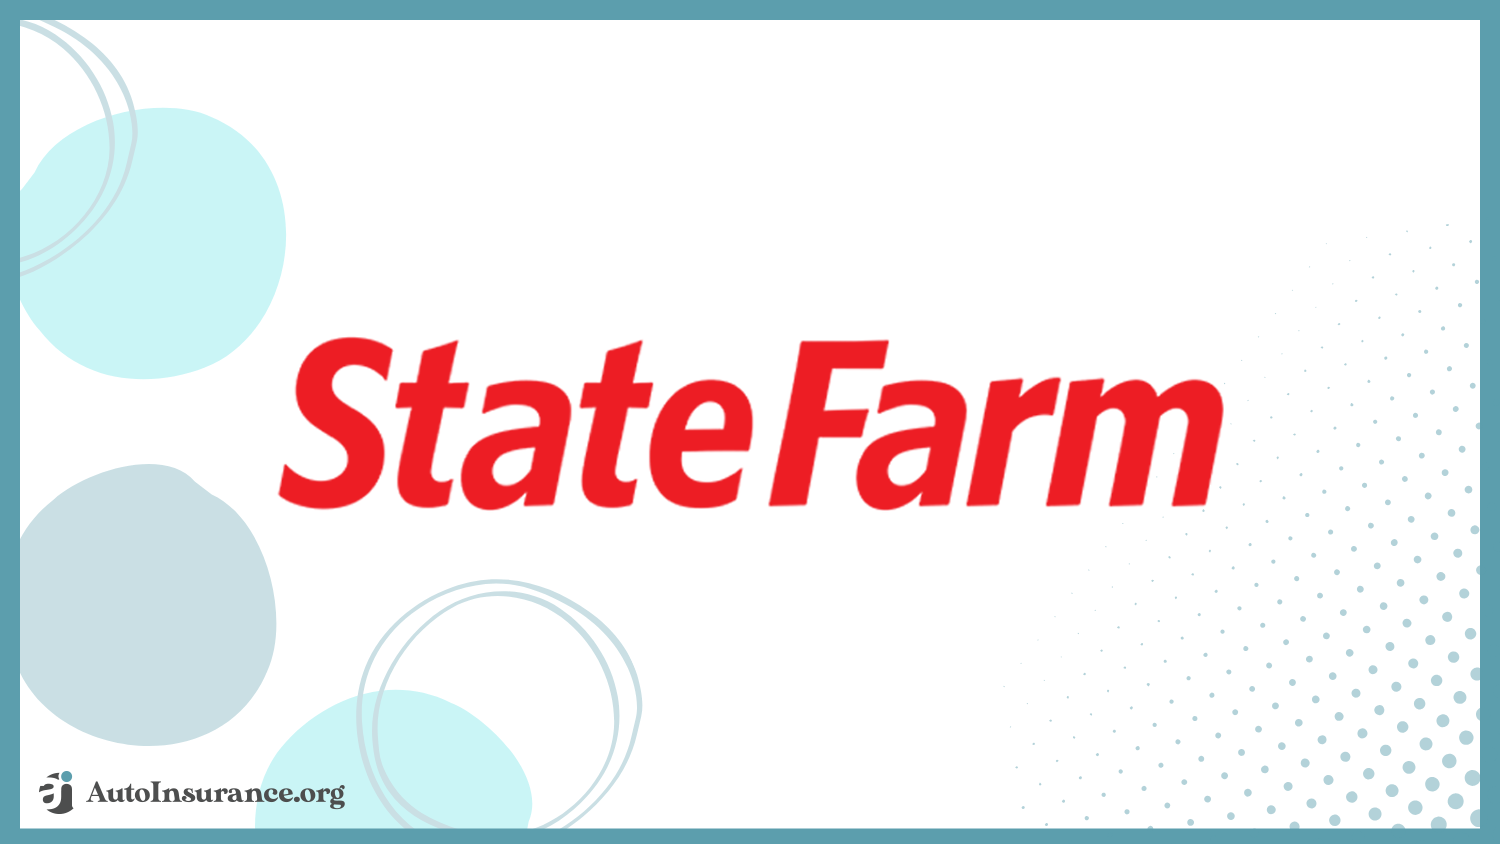 State Farm: Best Auto Insurance for Drivers with Dementia